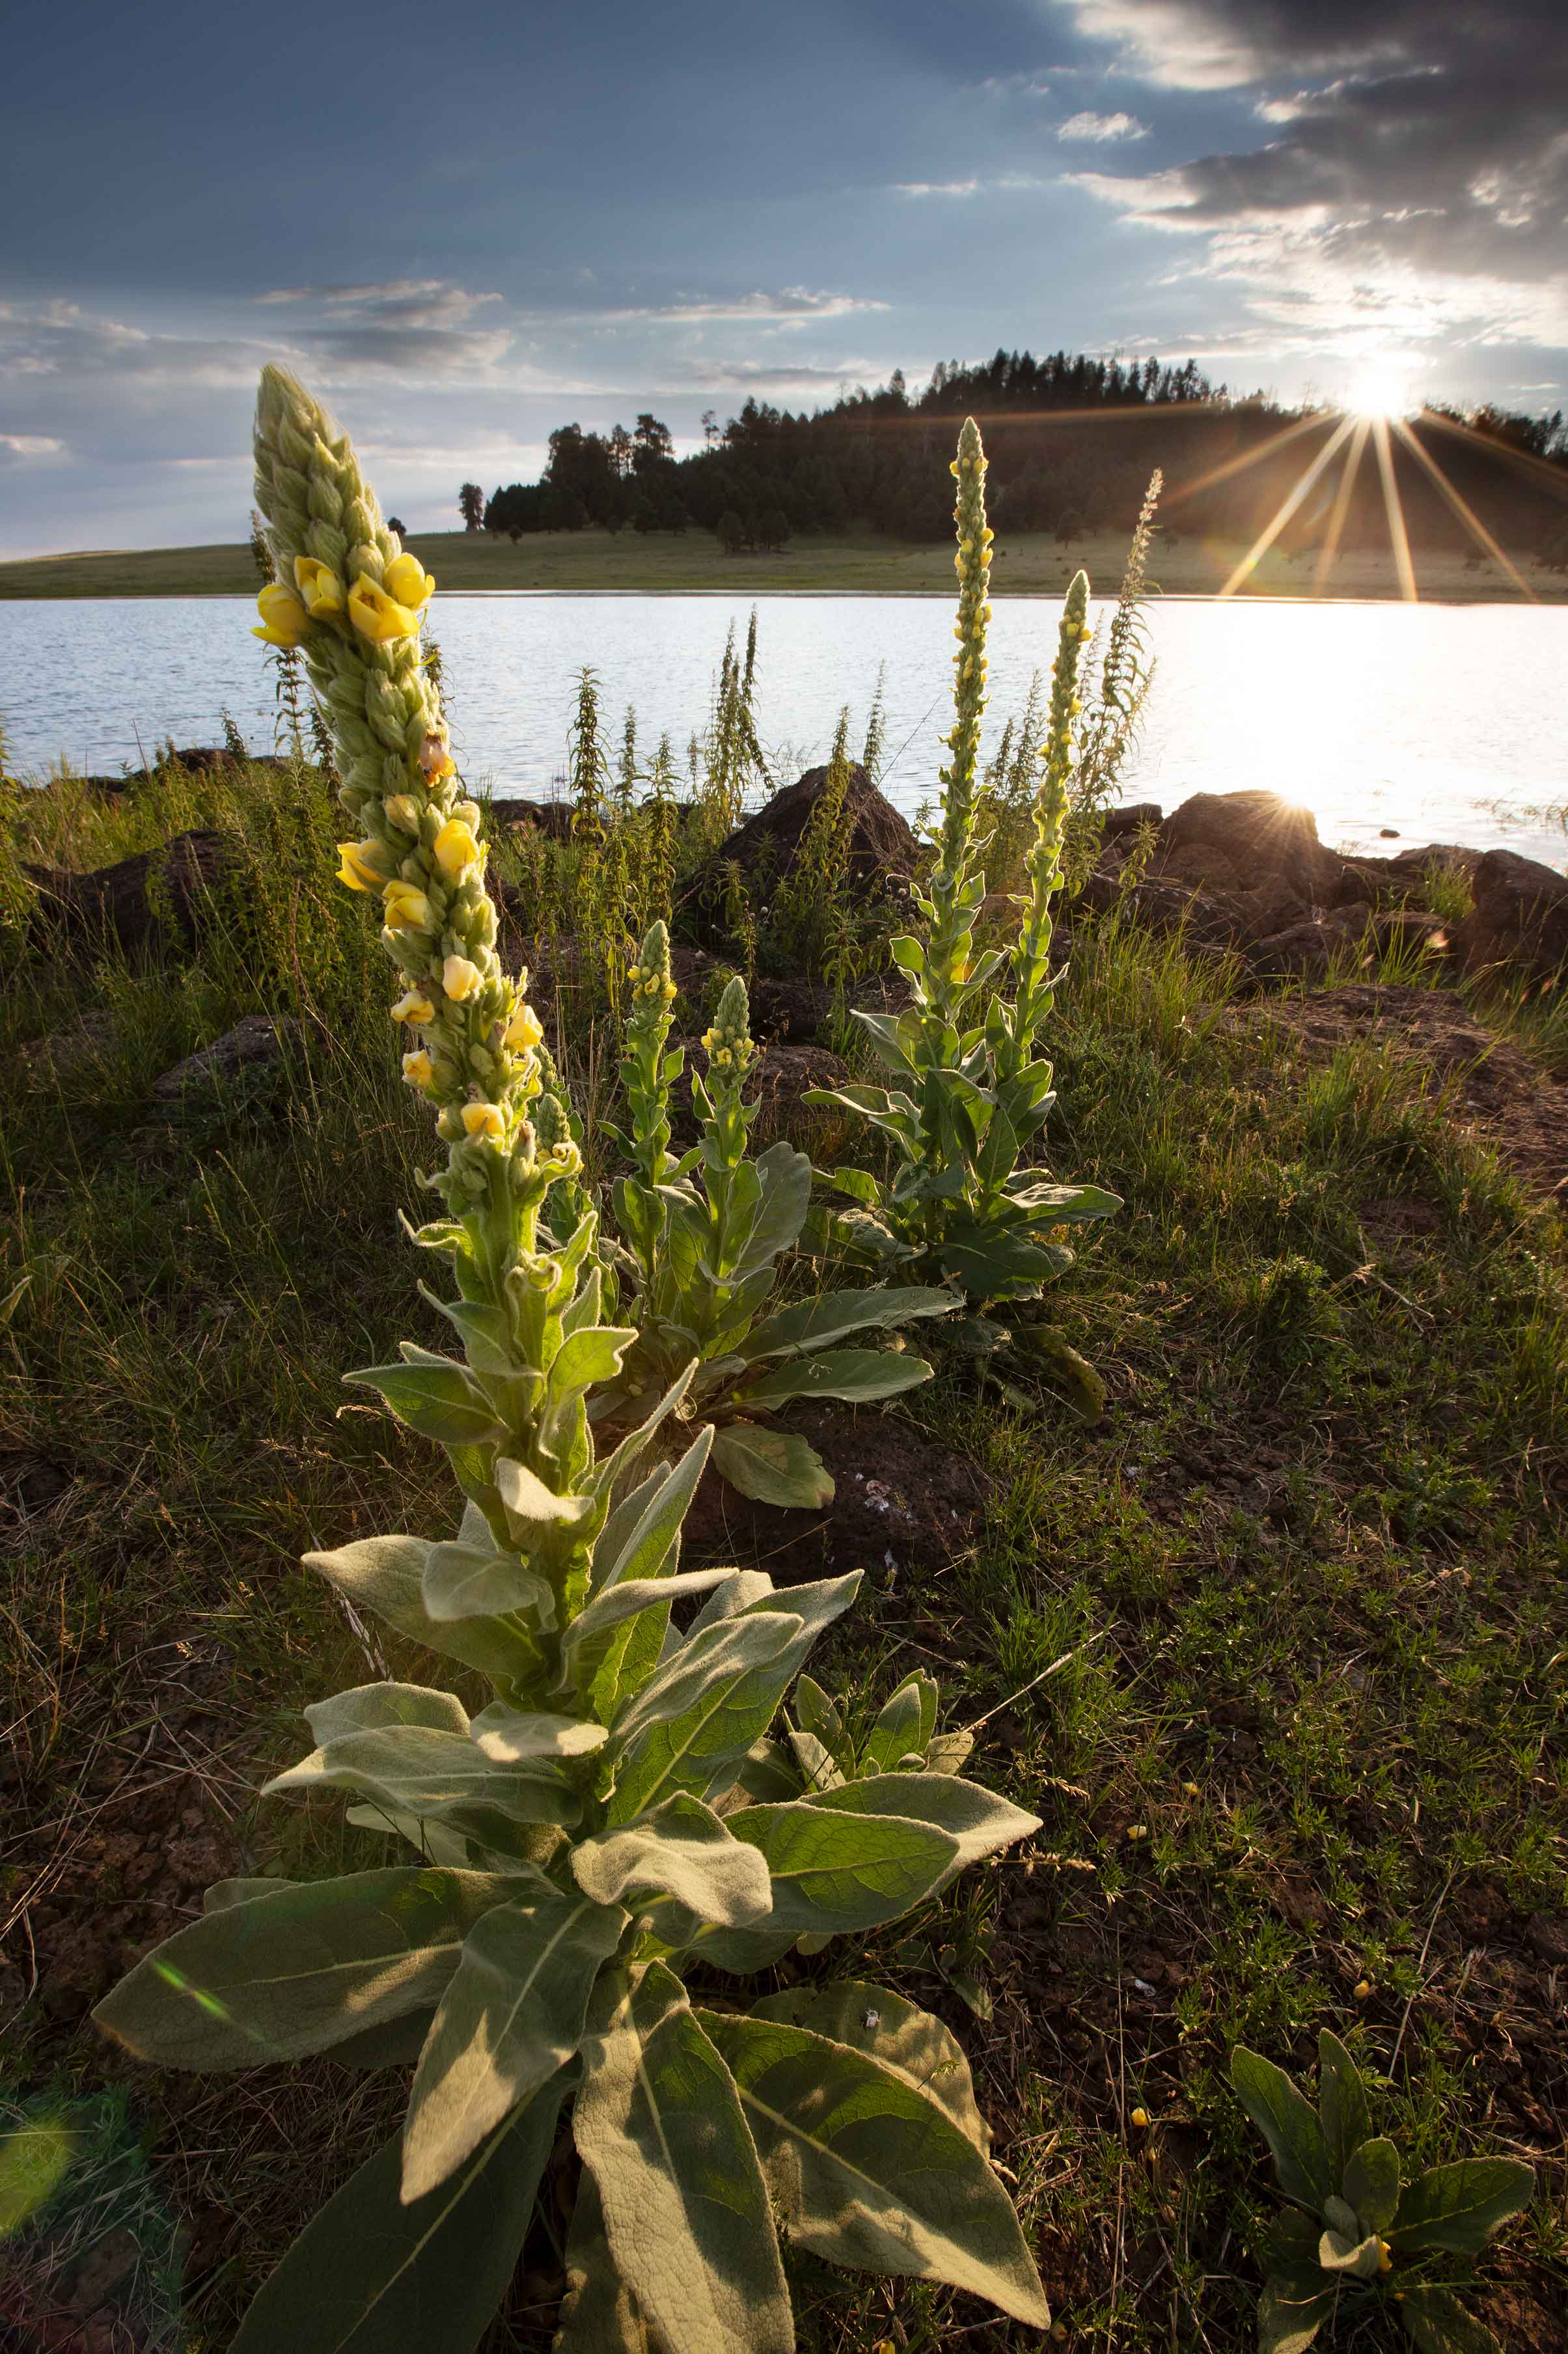 Mulleins at Crescent Lake in the White Mts. of eastern Arizona.